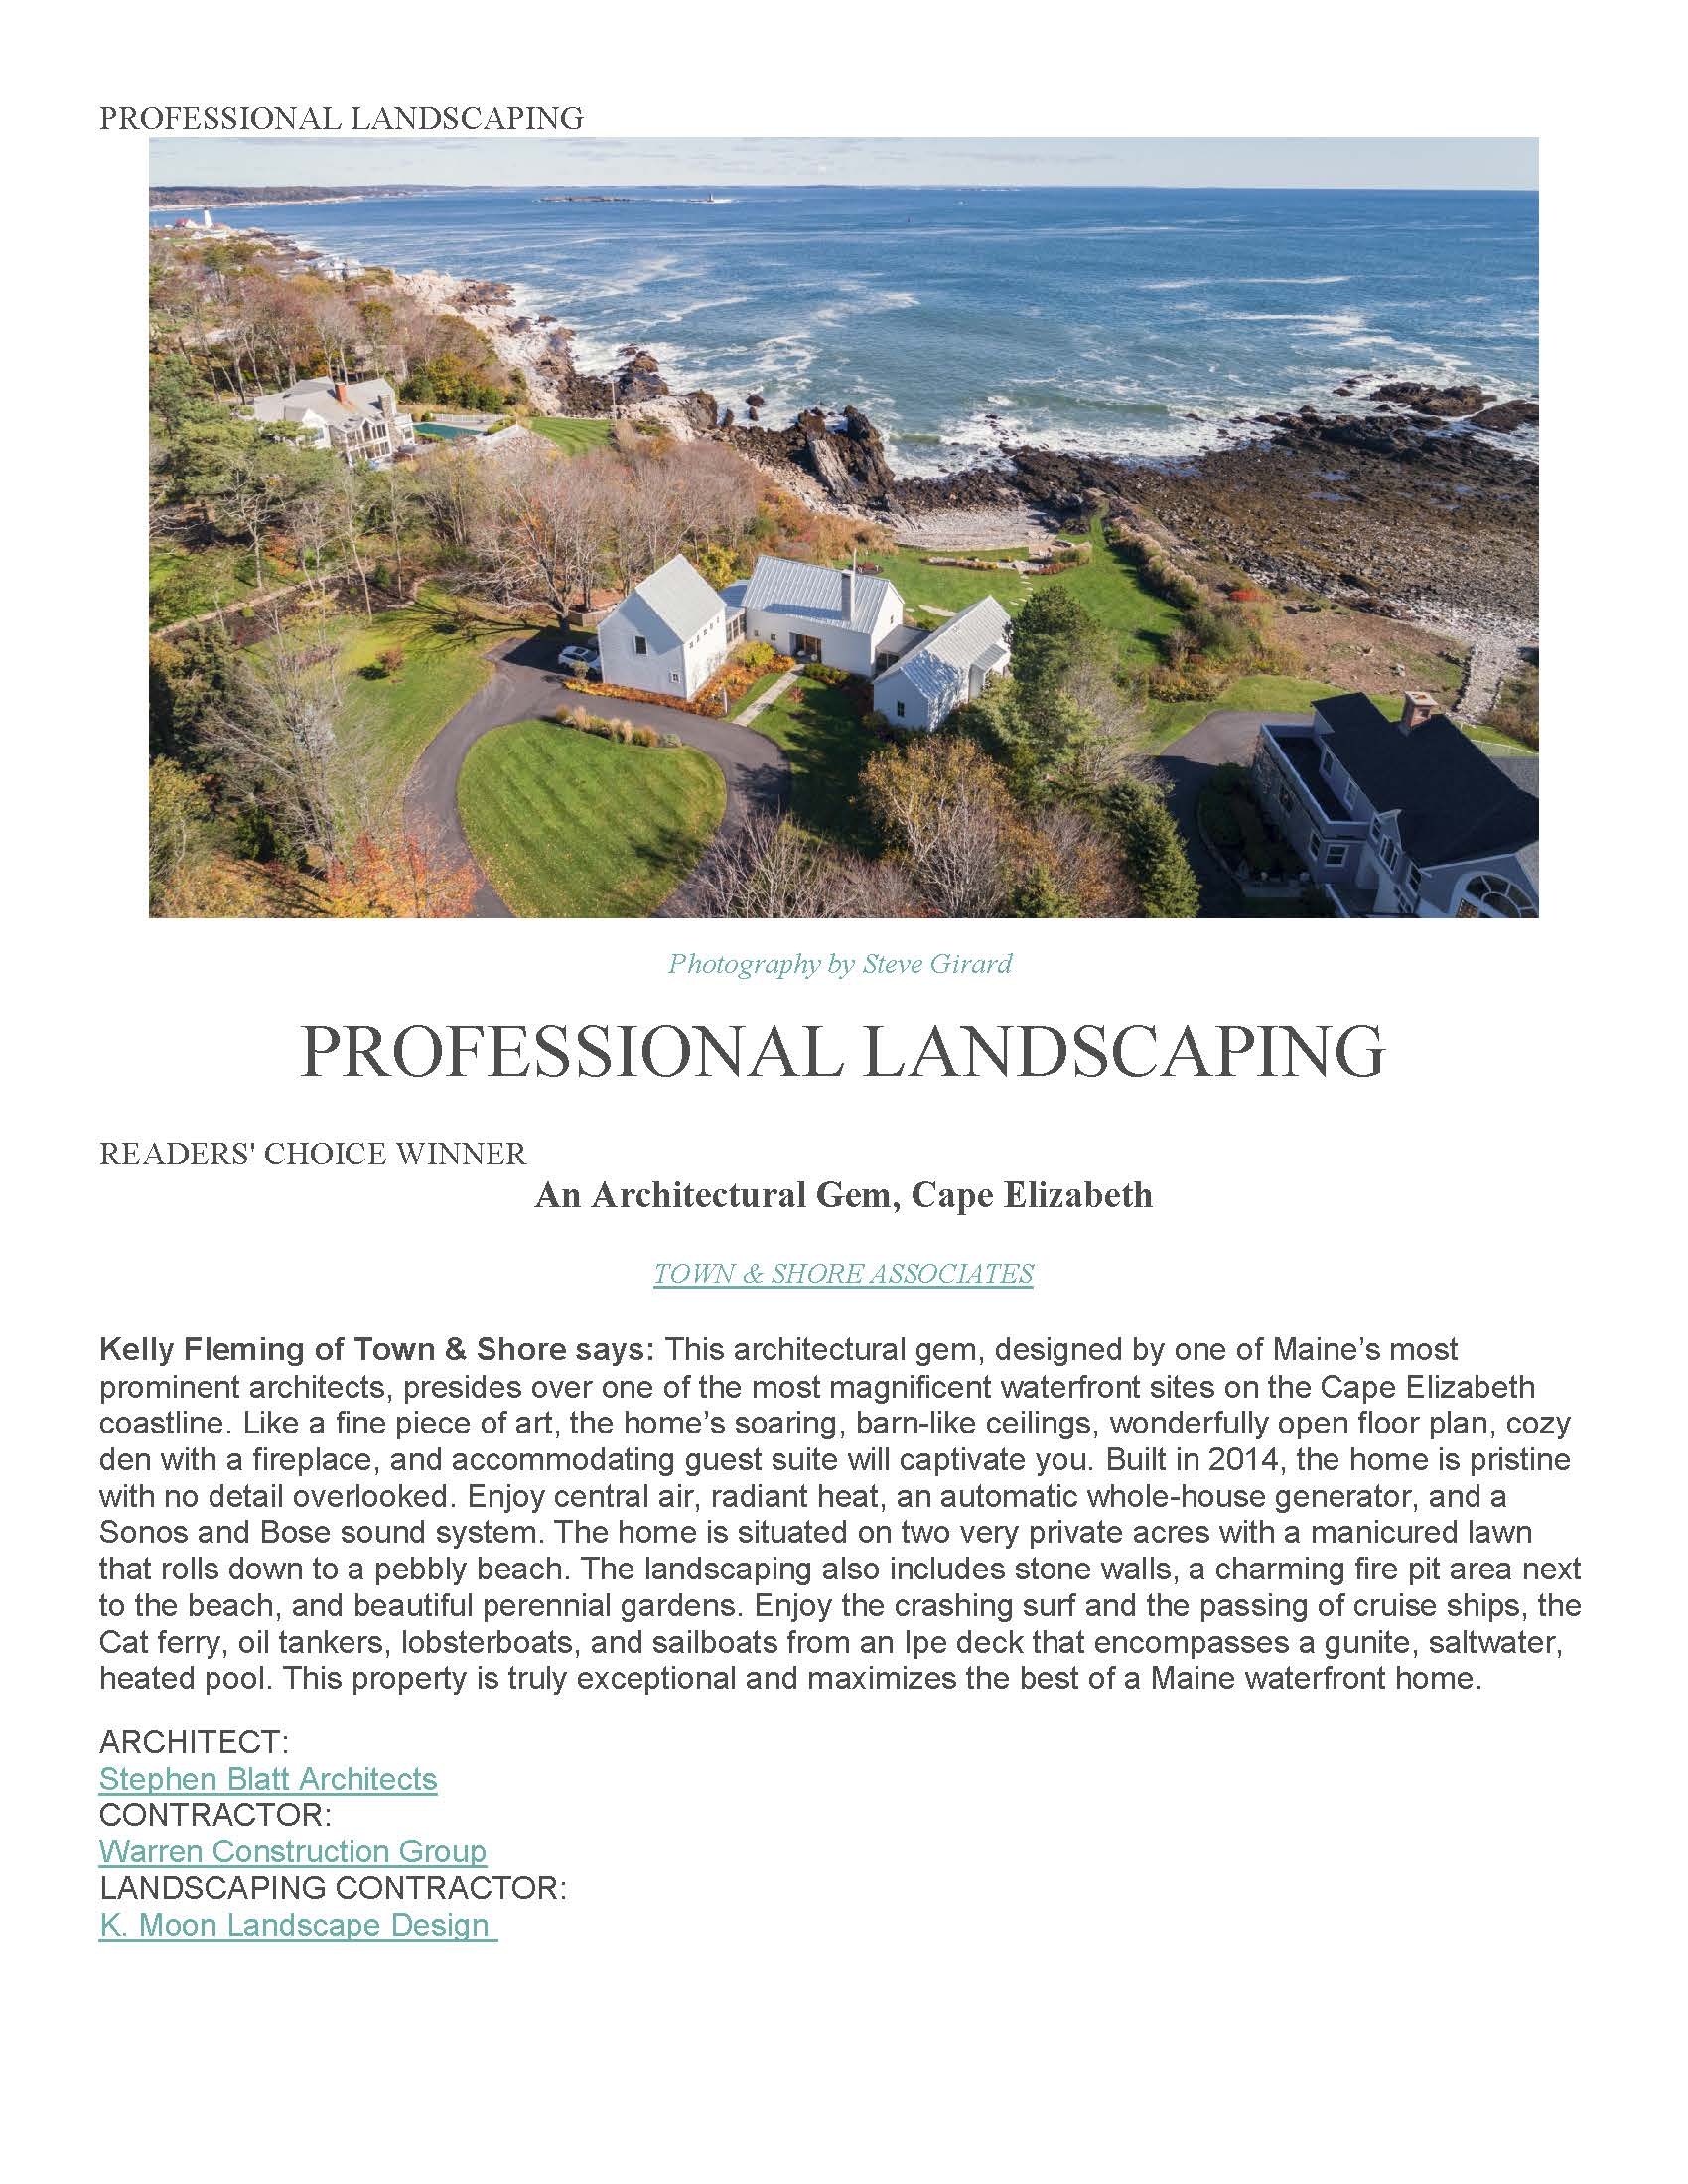 Cape Elizabeth house readers choice professional landscaping award 